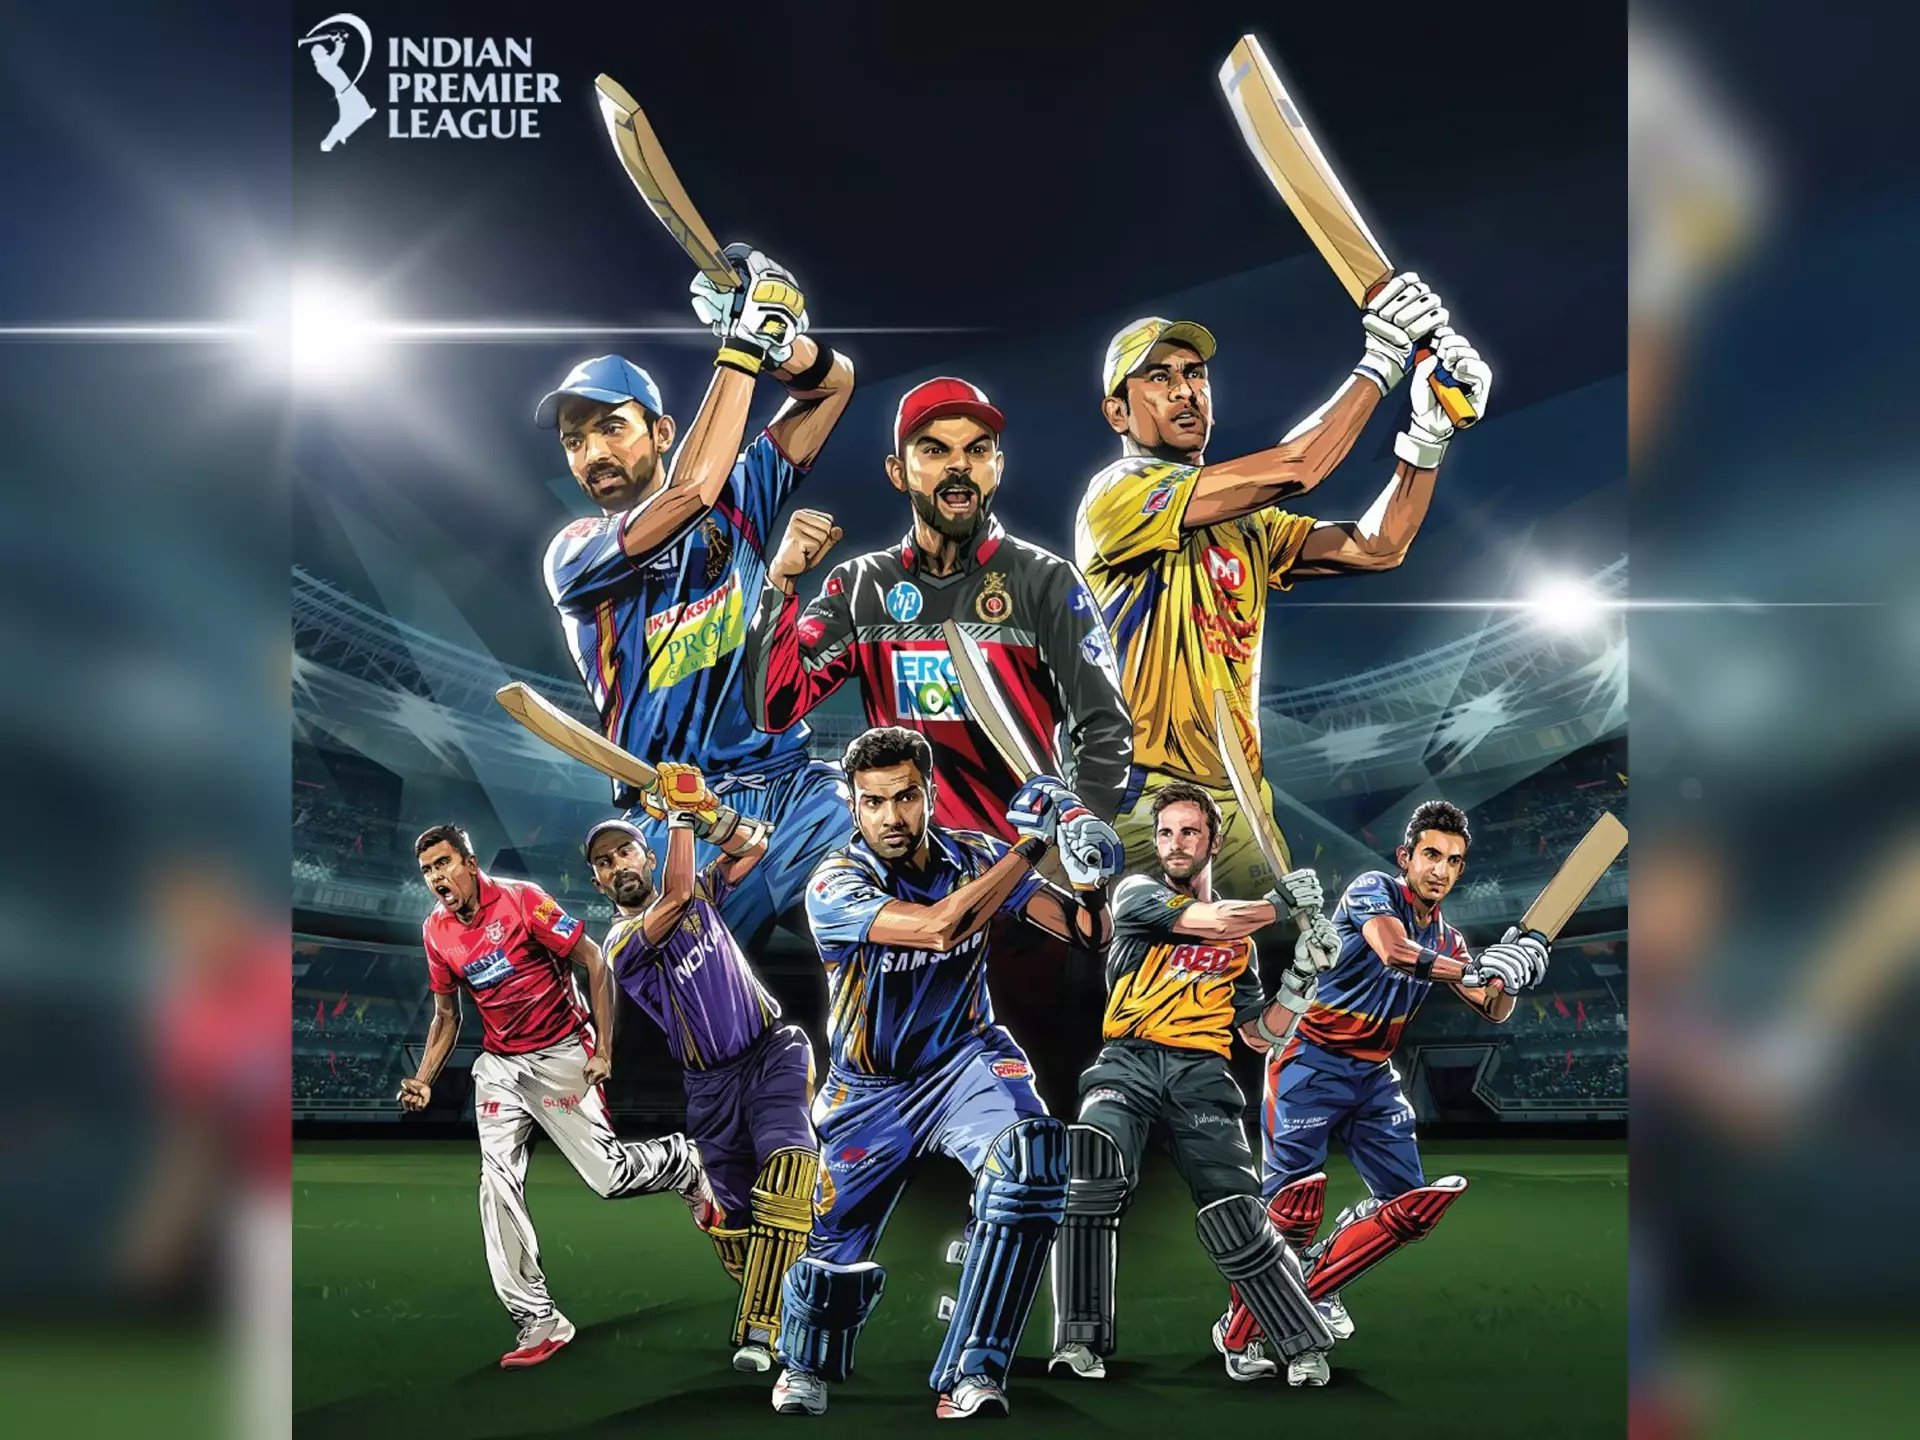 So it's no suprise that the bets and most profitable odds can be found during the IPL games.